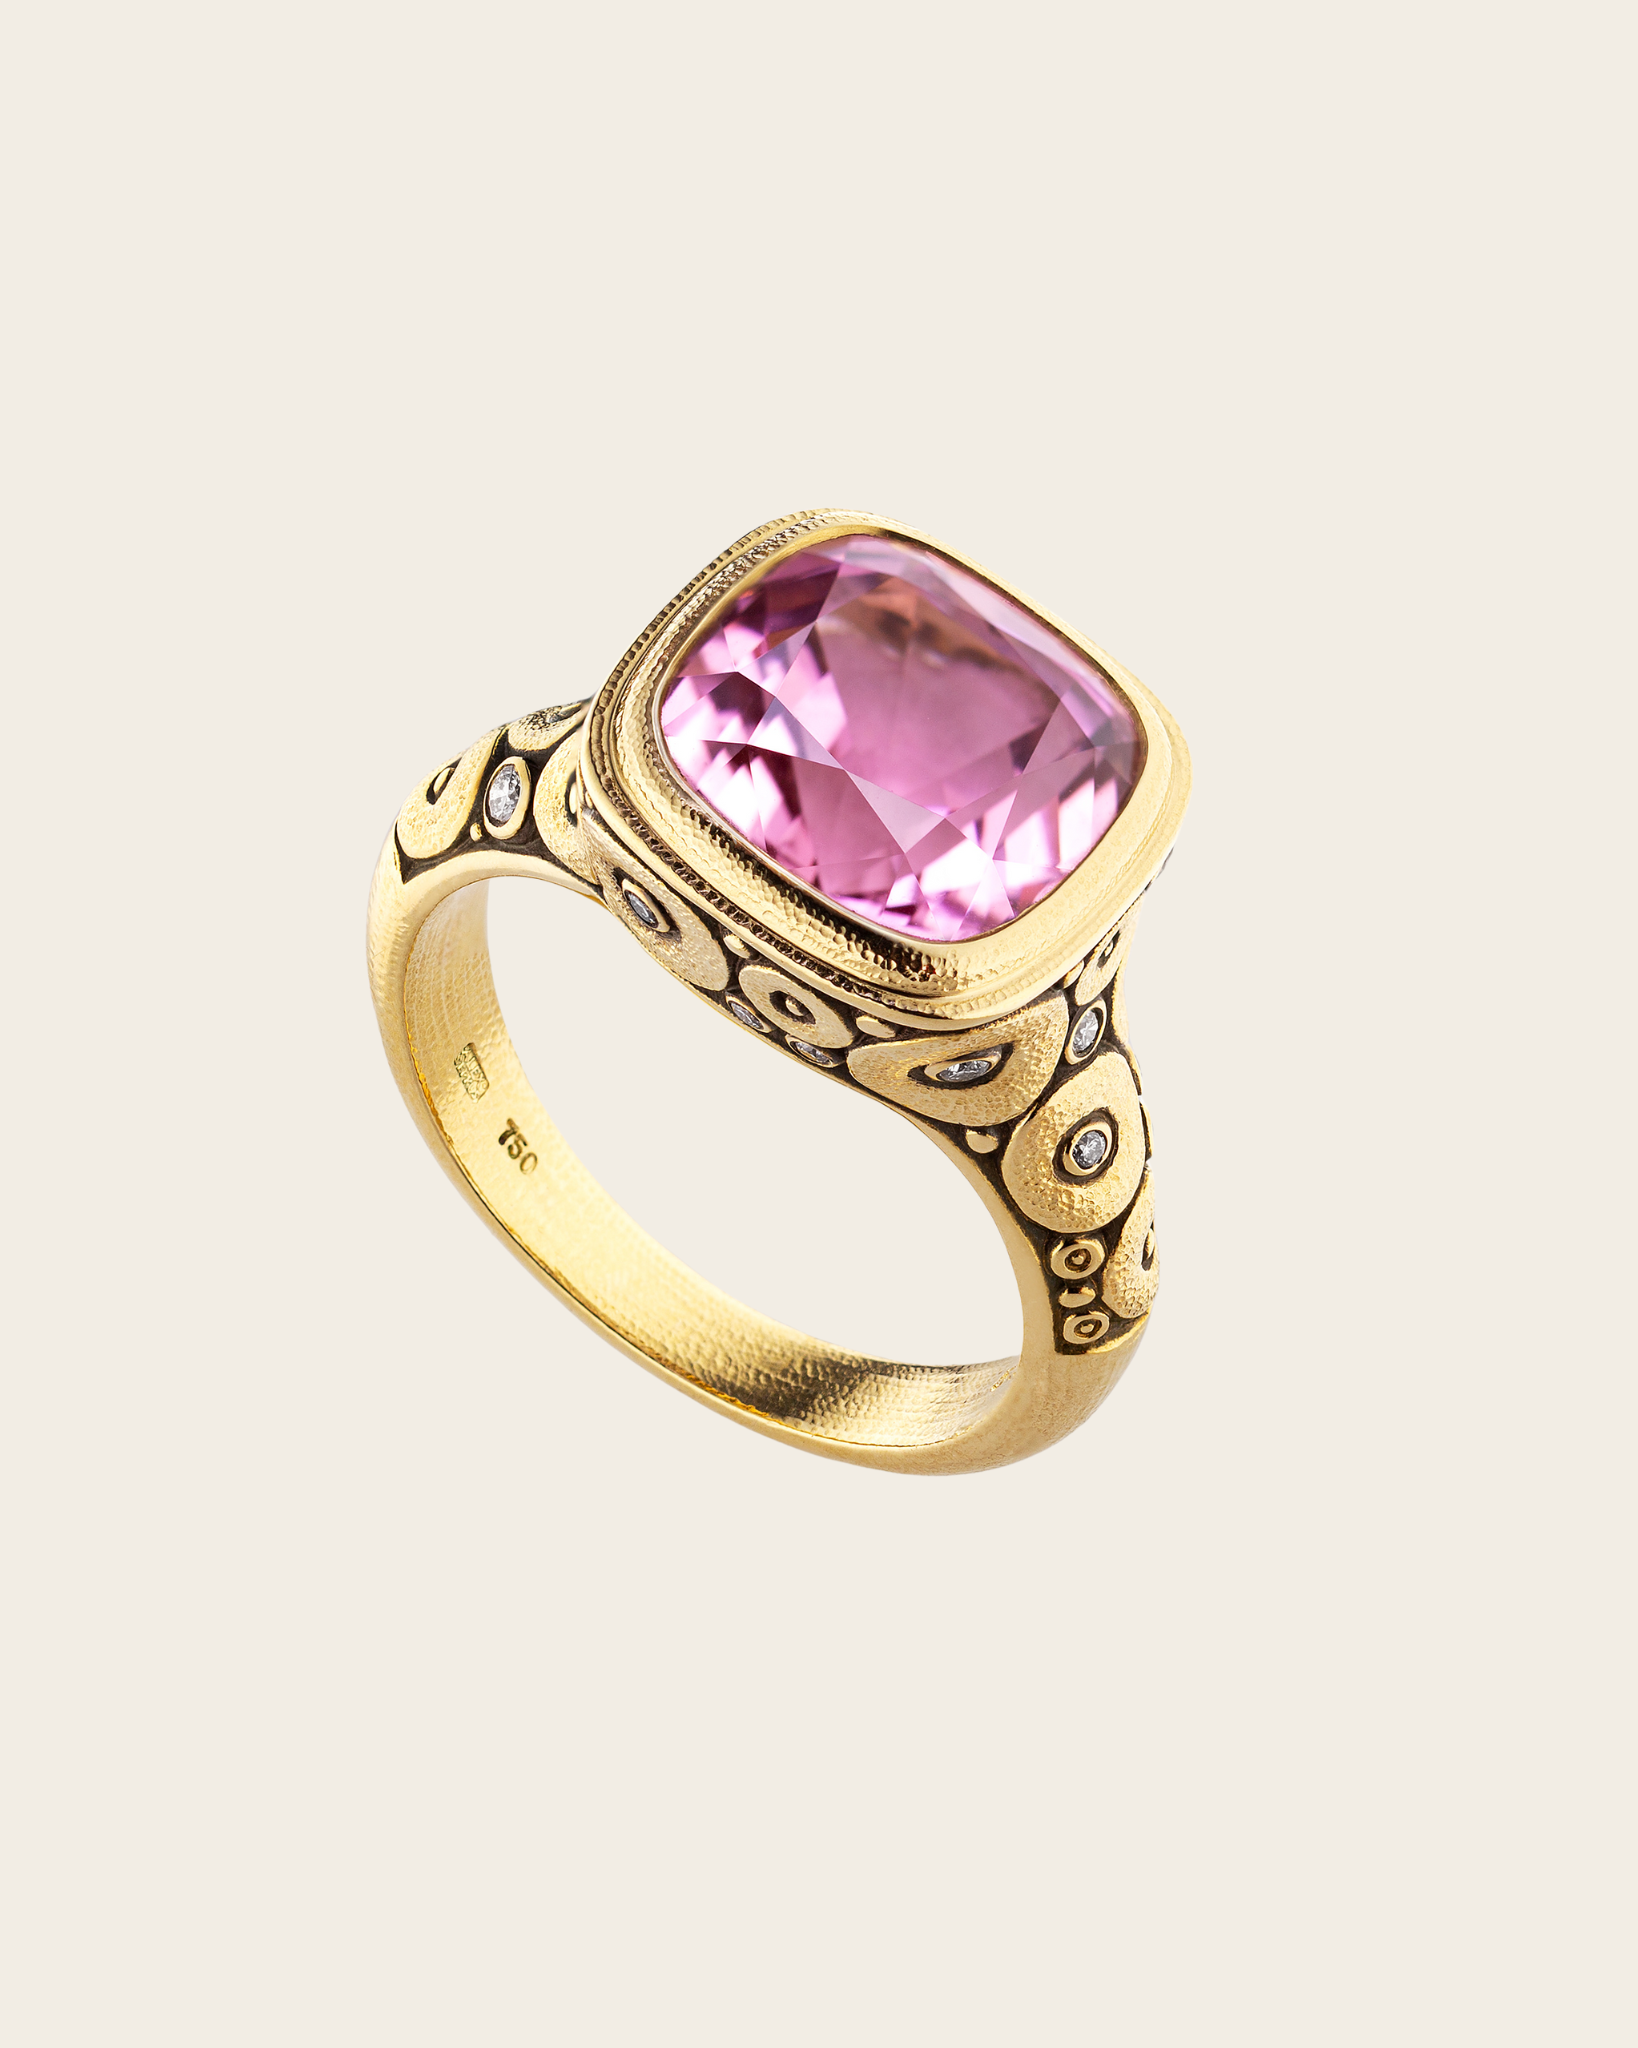 One of a Kind Pink Tourmaline Ring